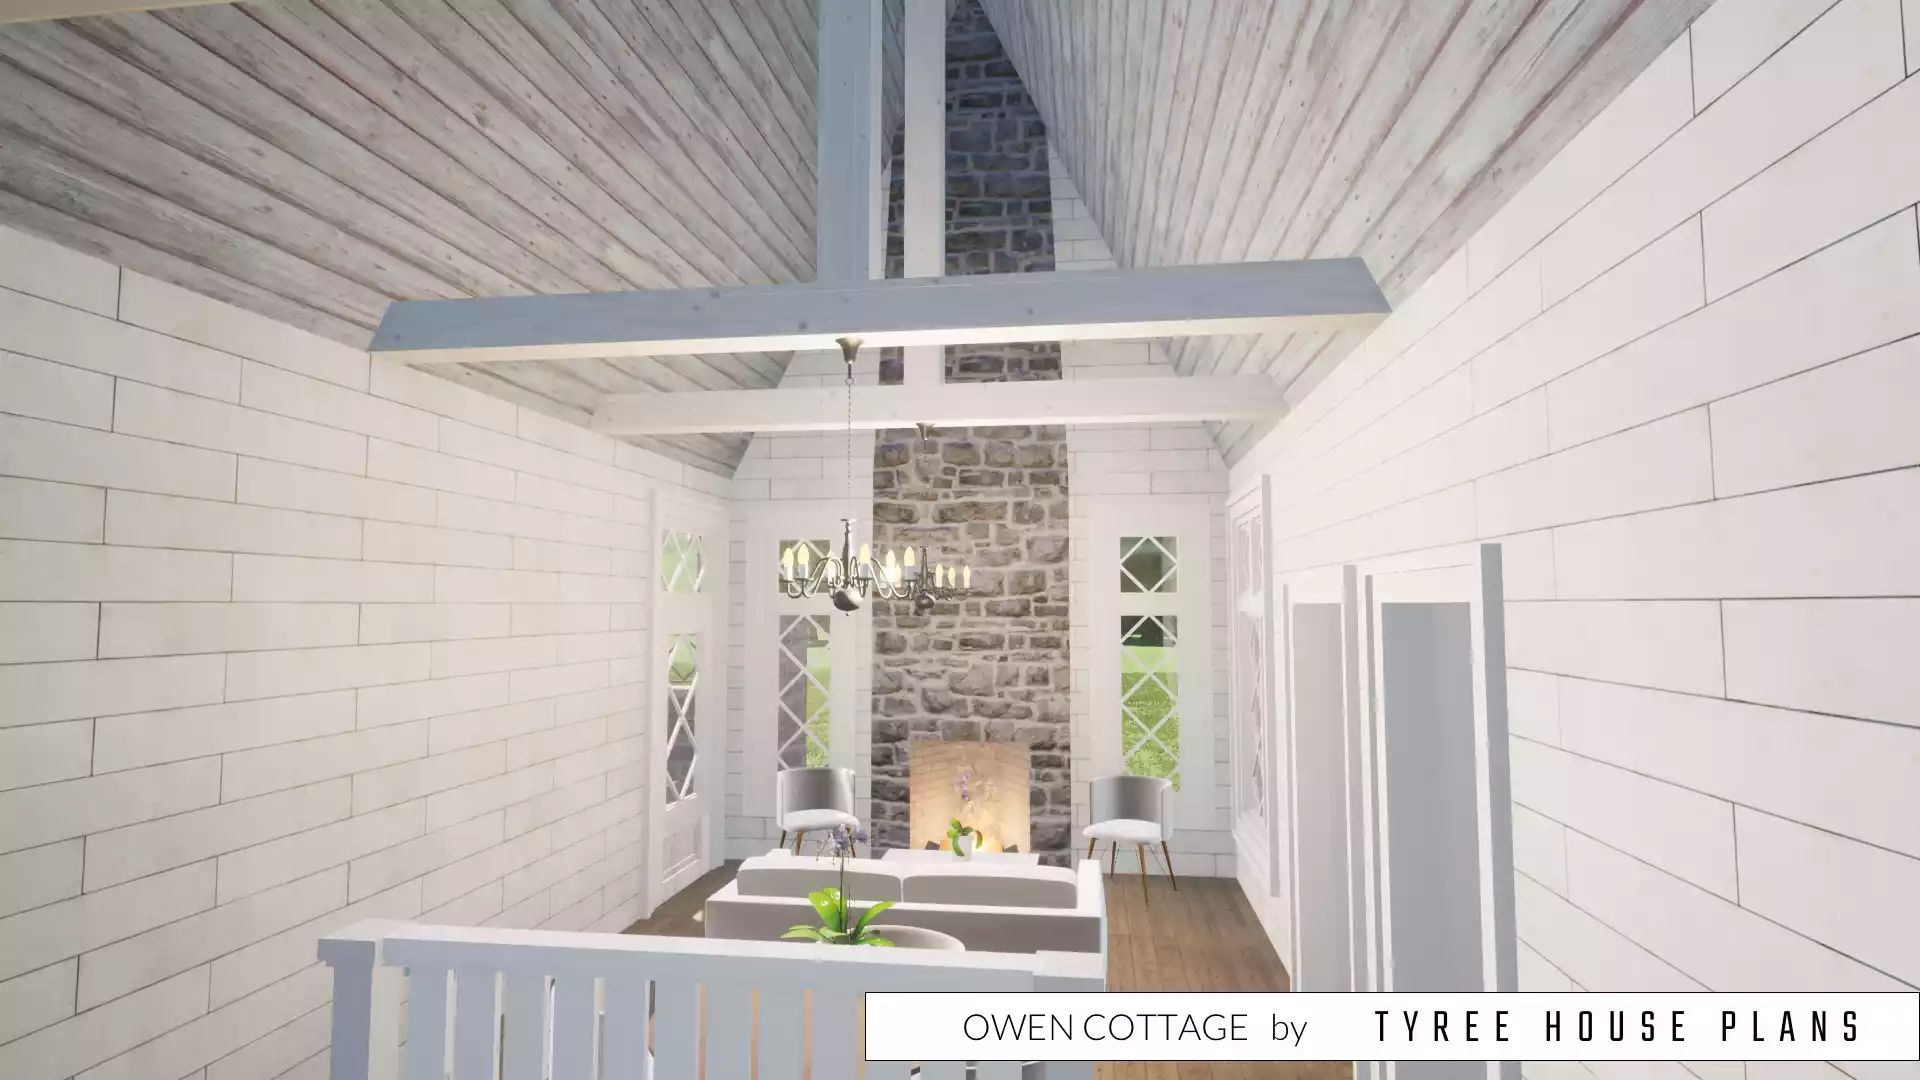 Owen Cottage House Plan by Tyree House Plans